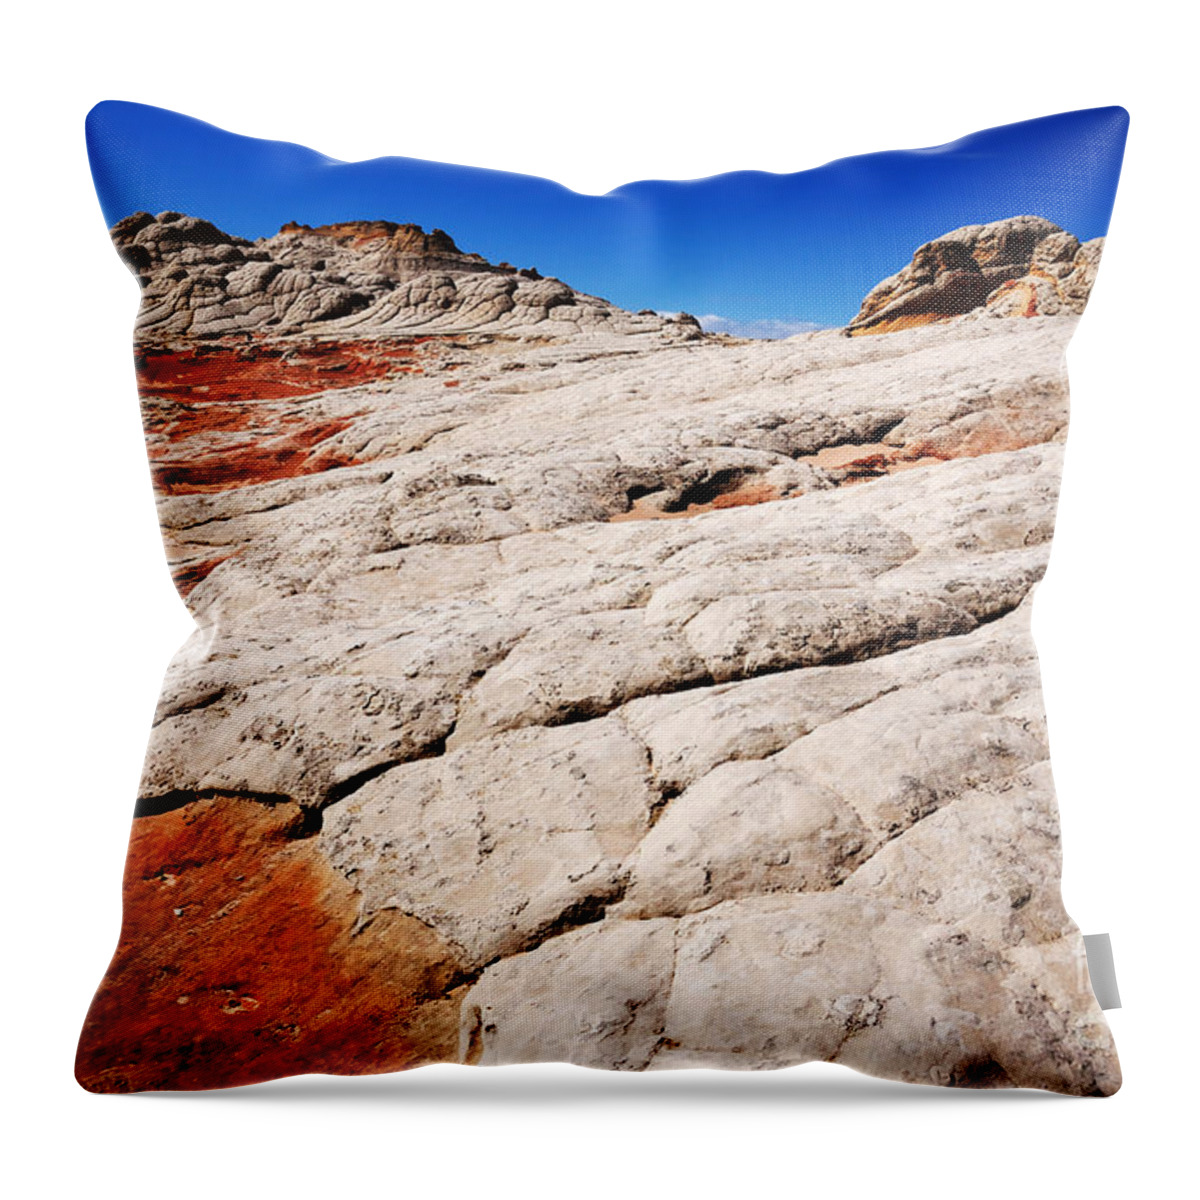 White Pocket Throw Pillow featuring the photograph White Pocket 3 by Vivian Christopher